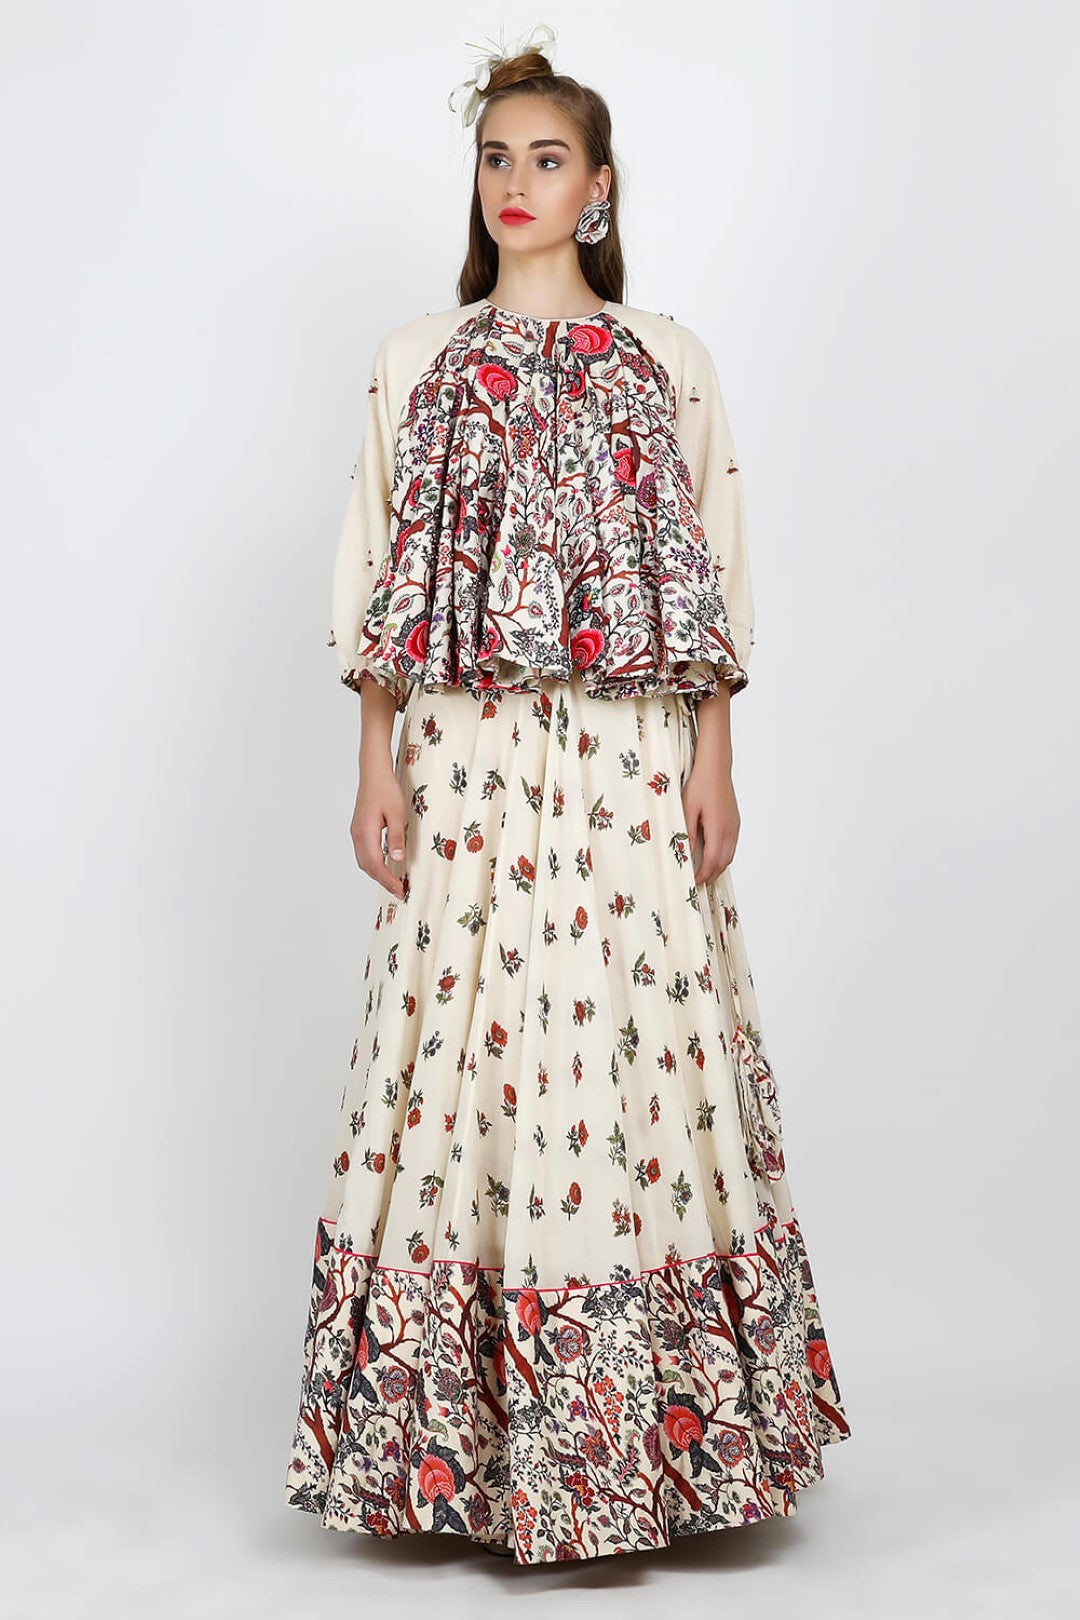 peasant top paired with printed flare skirt